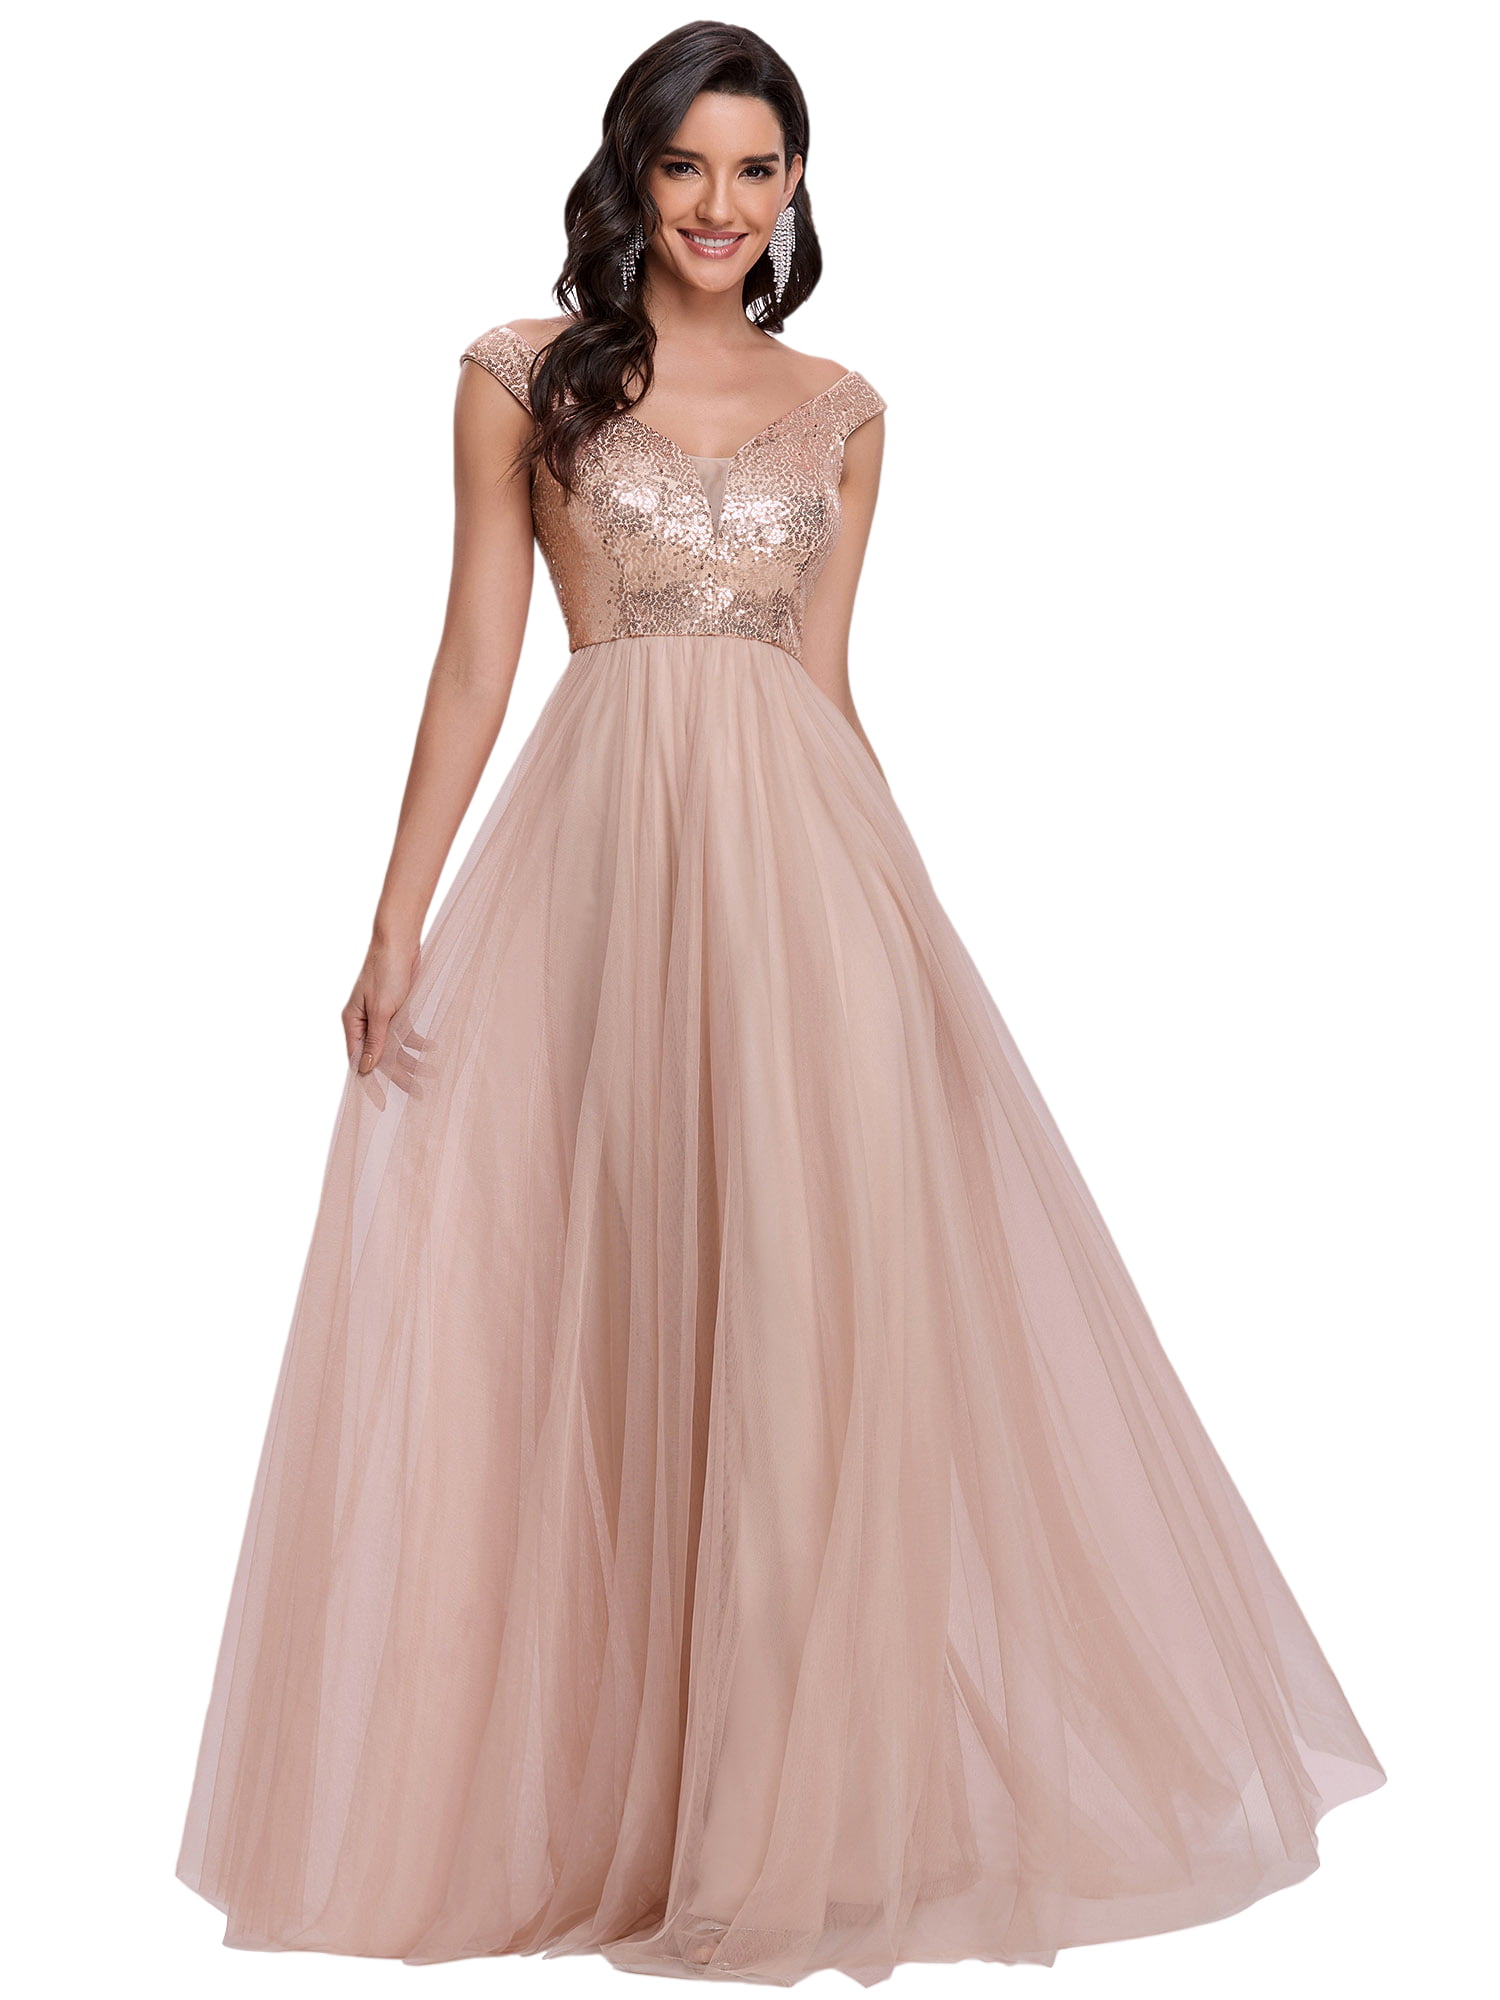 Womens Deep V Neck A Line Ruched Chiffon Bridesmaid Dresses Halter Long Prom Formal Party Gowns 